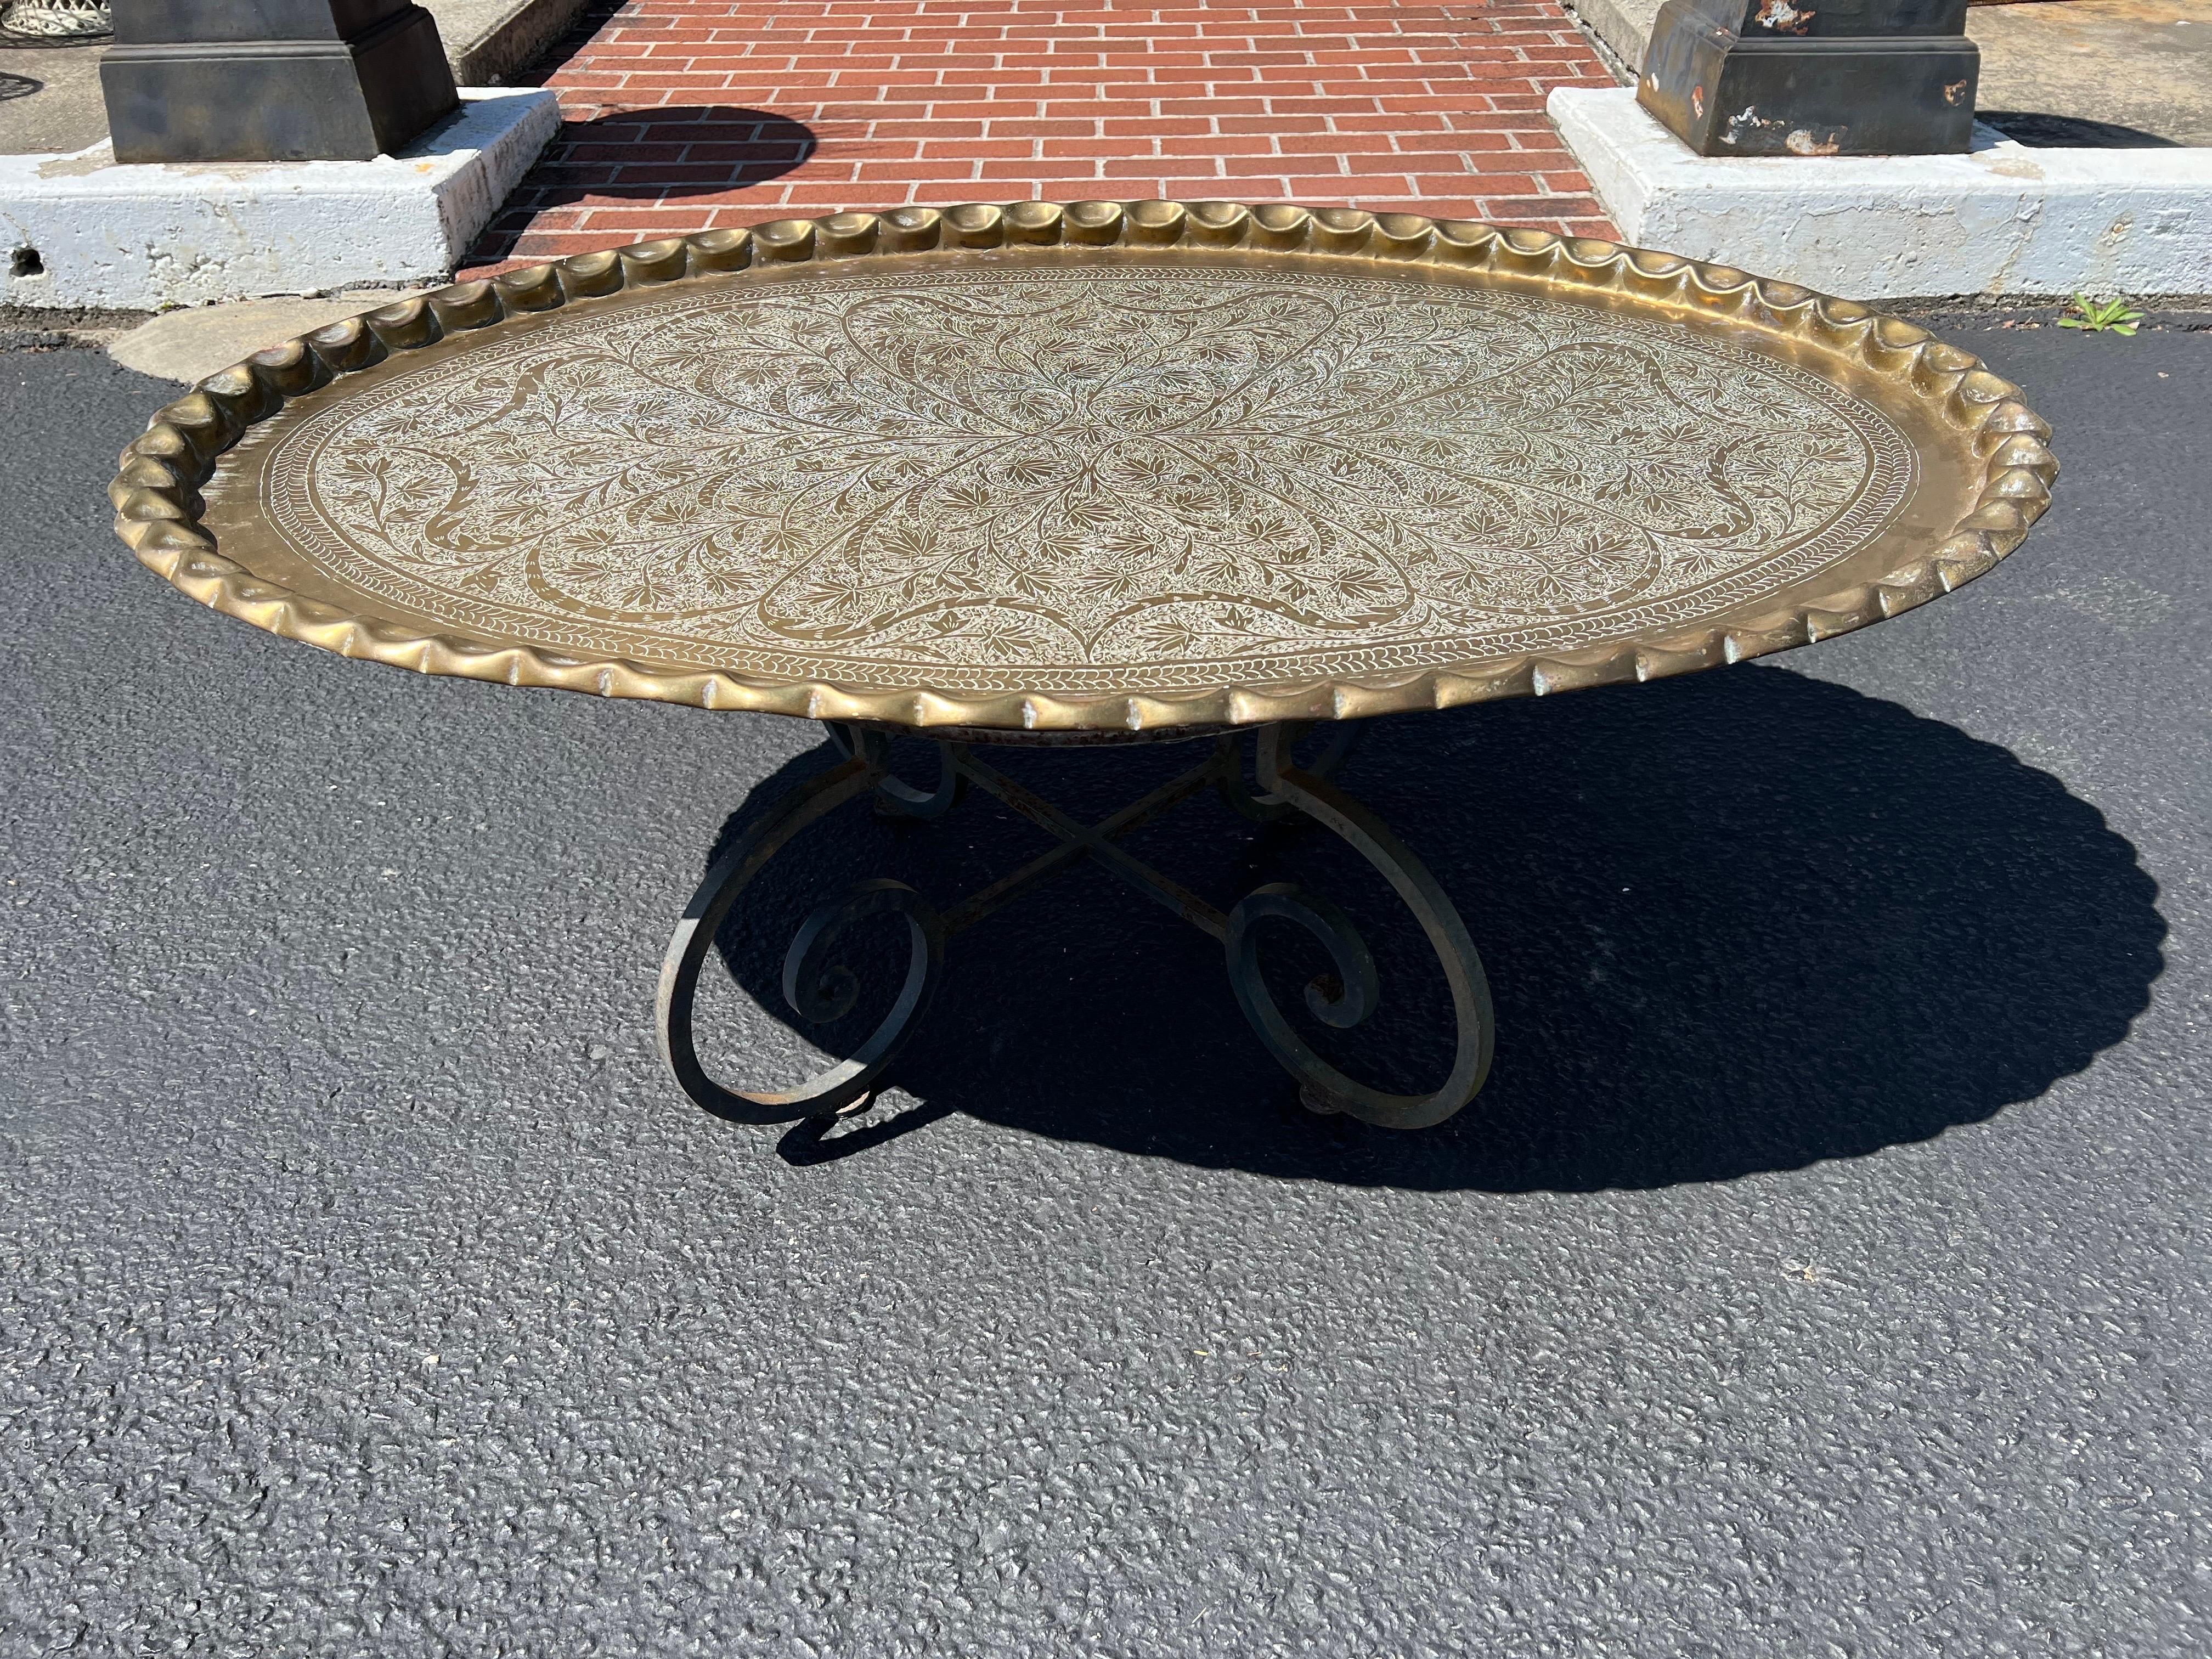 Large Moroccan brass tray table. Heavily embossed large oval tray table with incredible hand hammered edge that rests upon a forged iron base. Perfect oval shaped coffee table. Easy to move in or out doors.